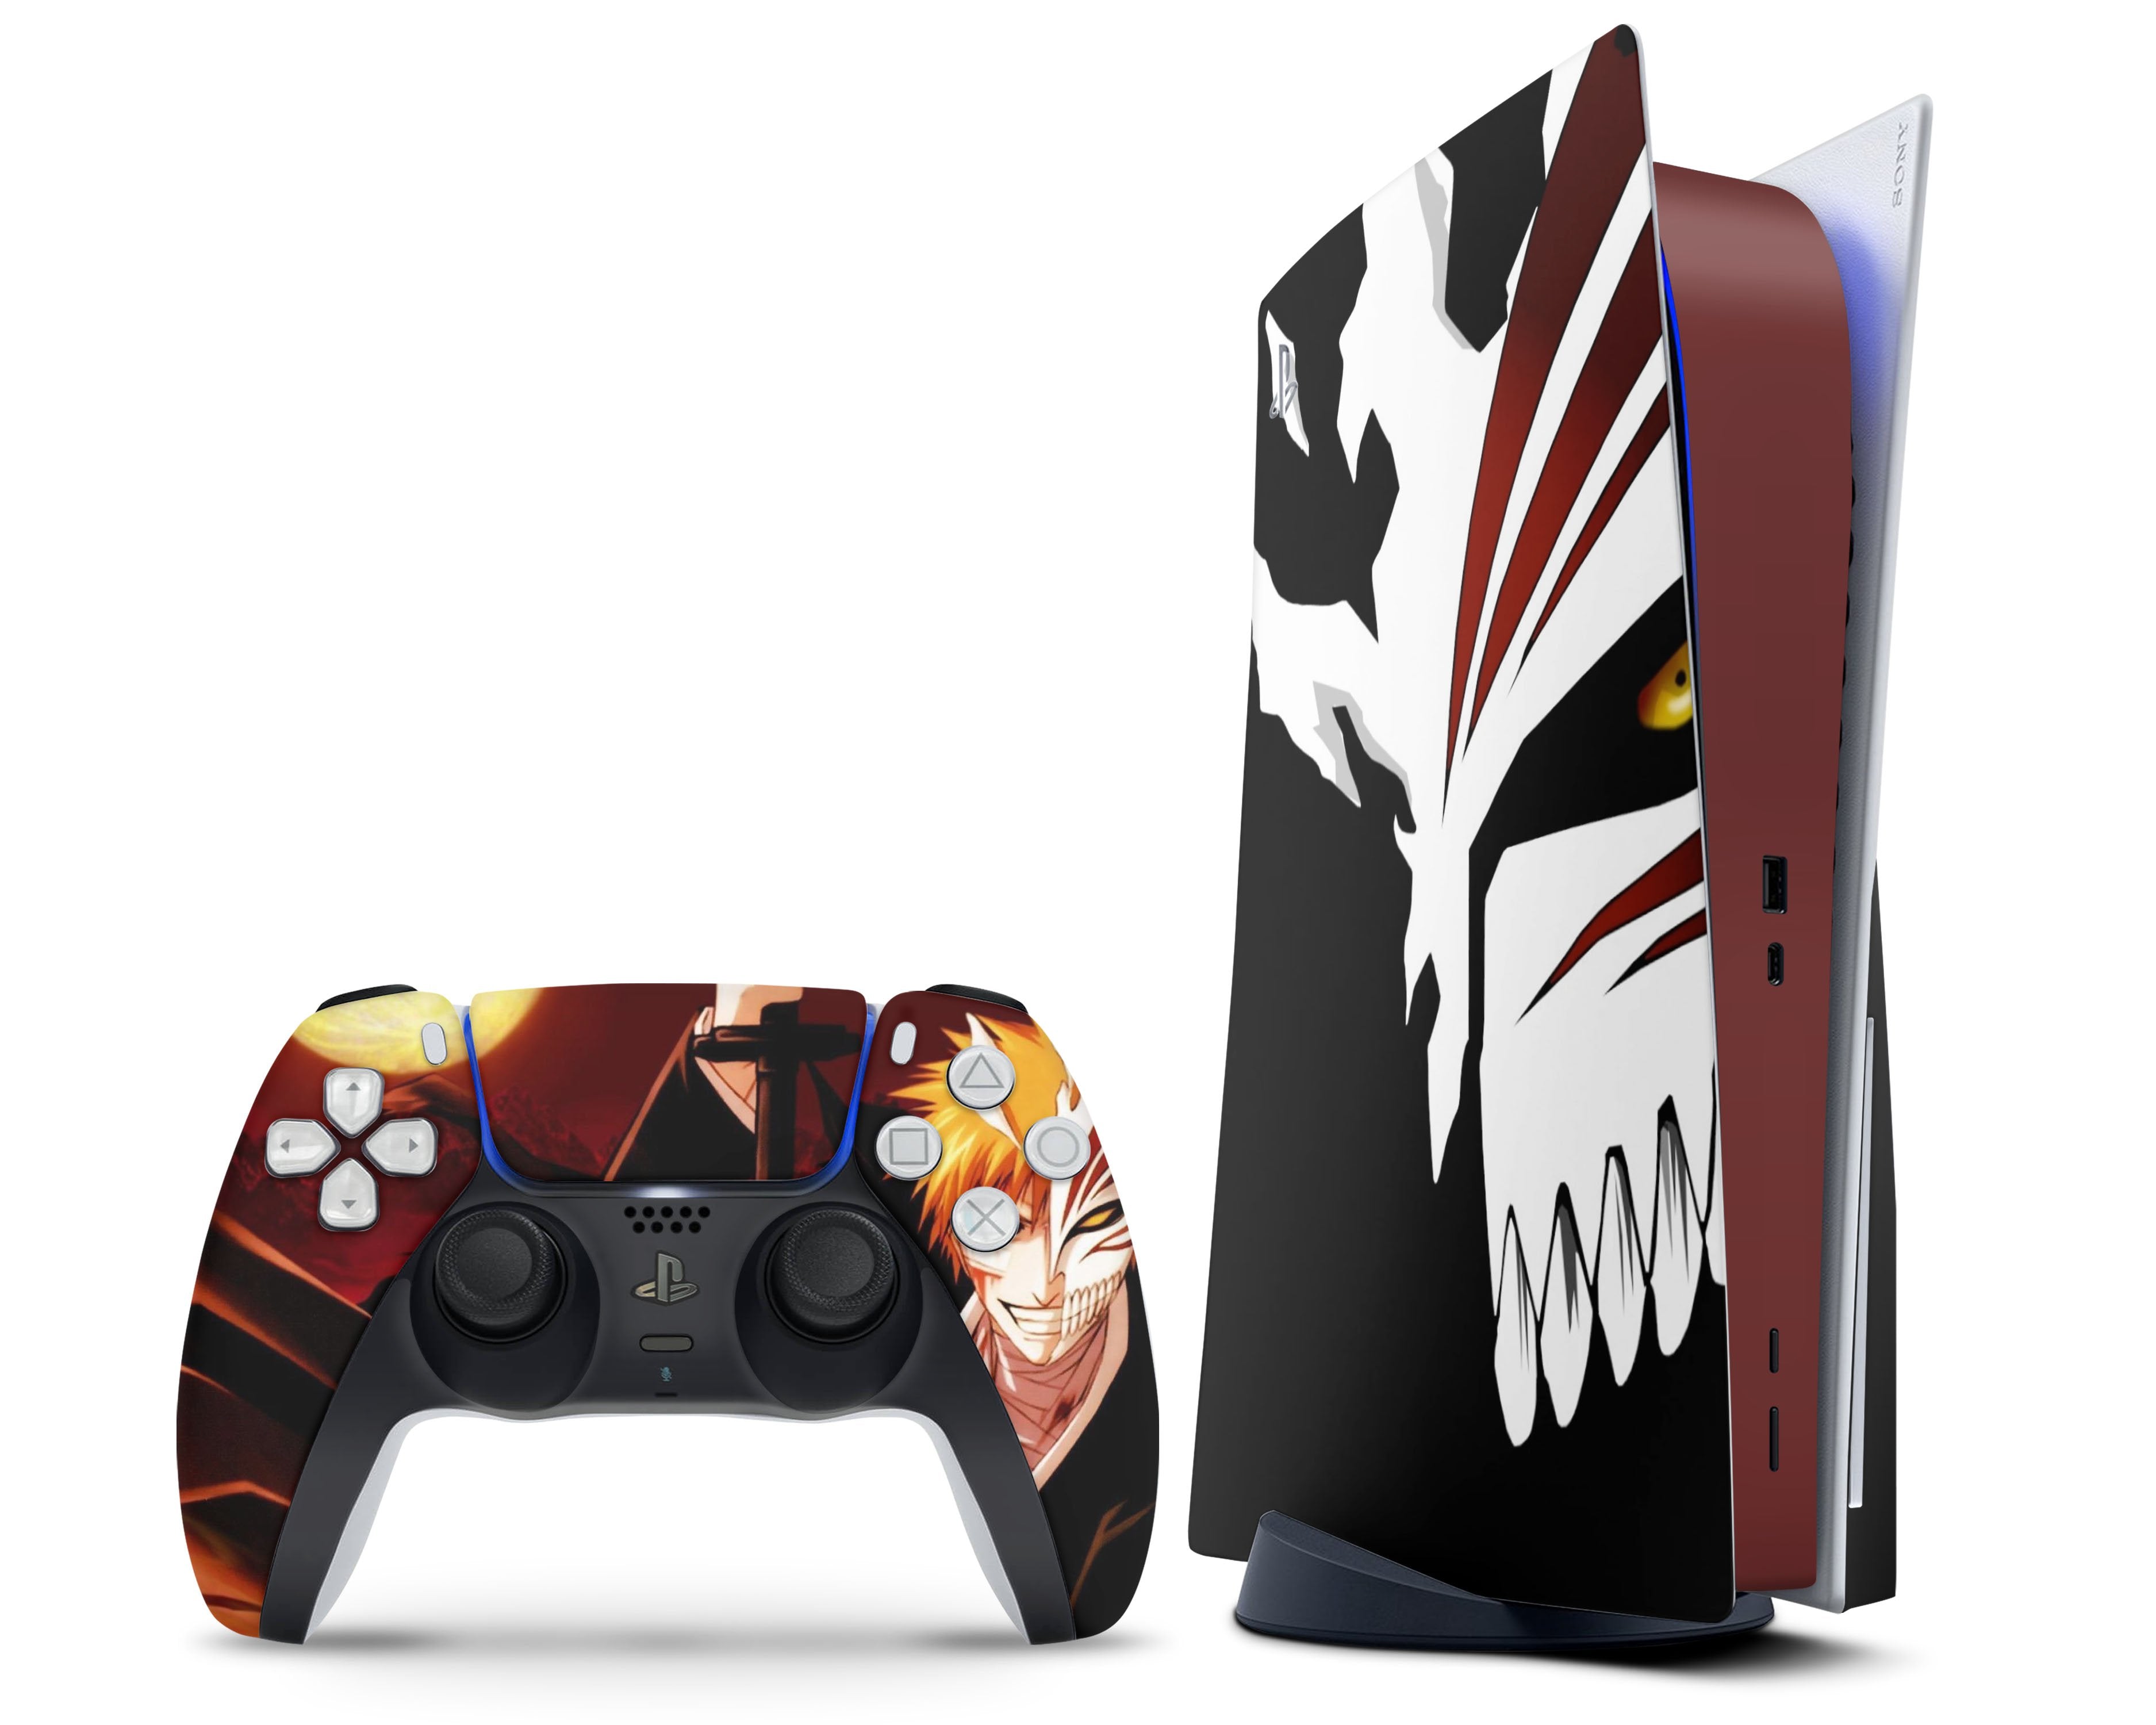 PS5 Skin Disc Edition Anime Console and Controller Accessories Cover Skins  Wraps Fan Art Design for Playstation 5 Disc Version  Imported Products  from USA  iBhejo